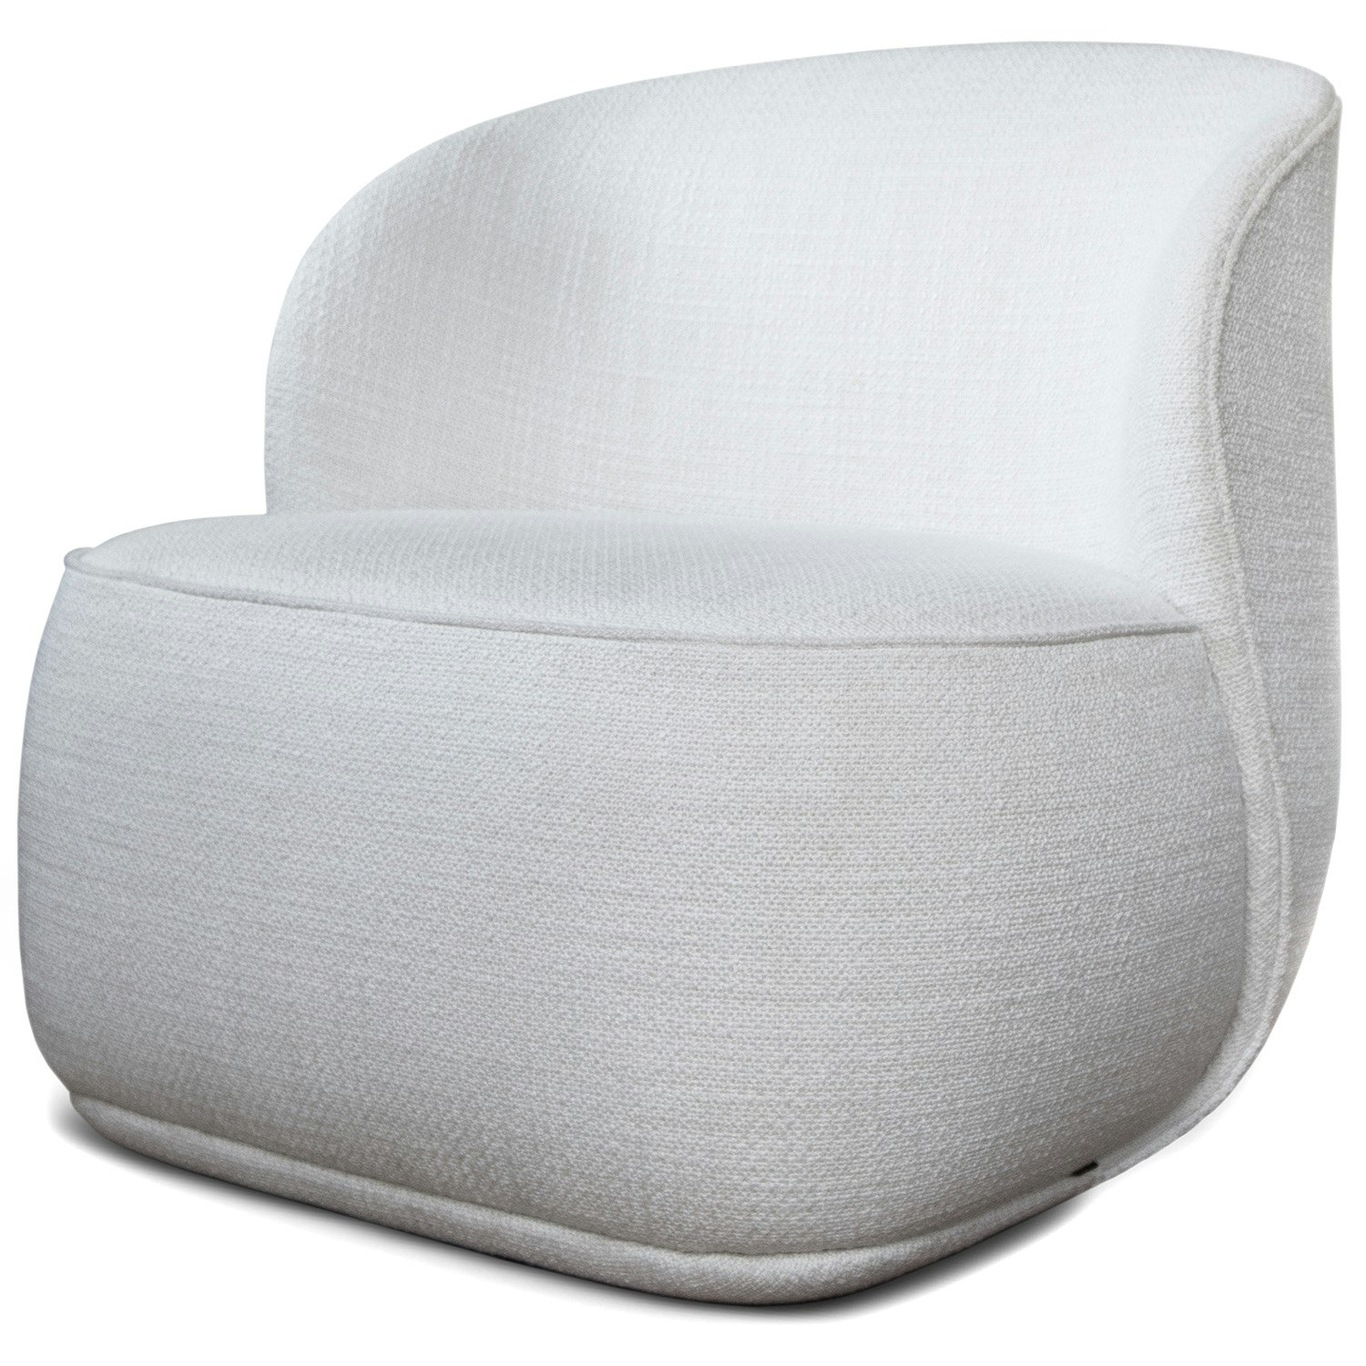 Pipe Swivel Lounge Chair With Return Function, Cream